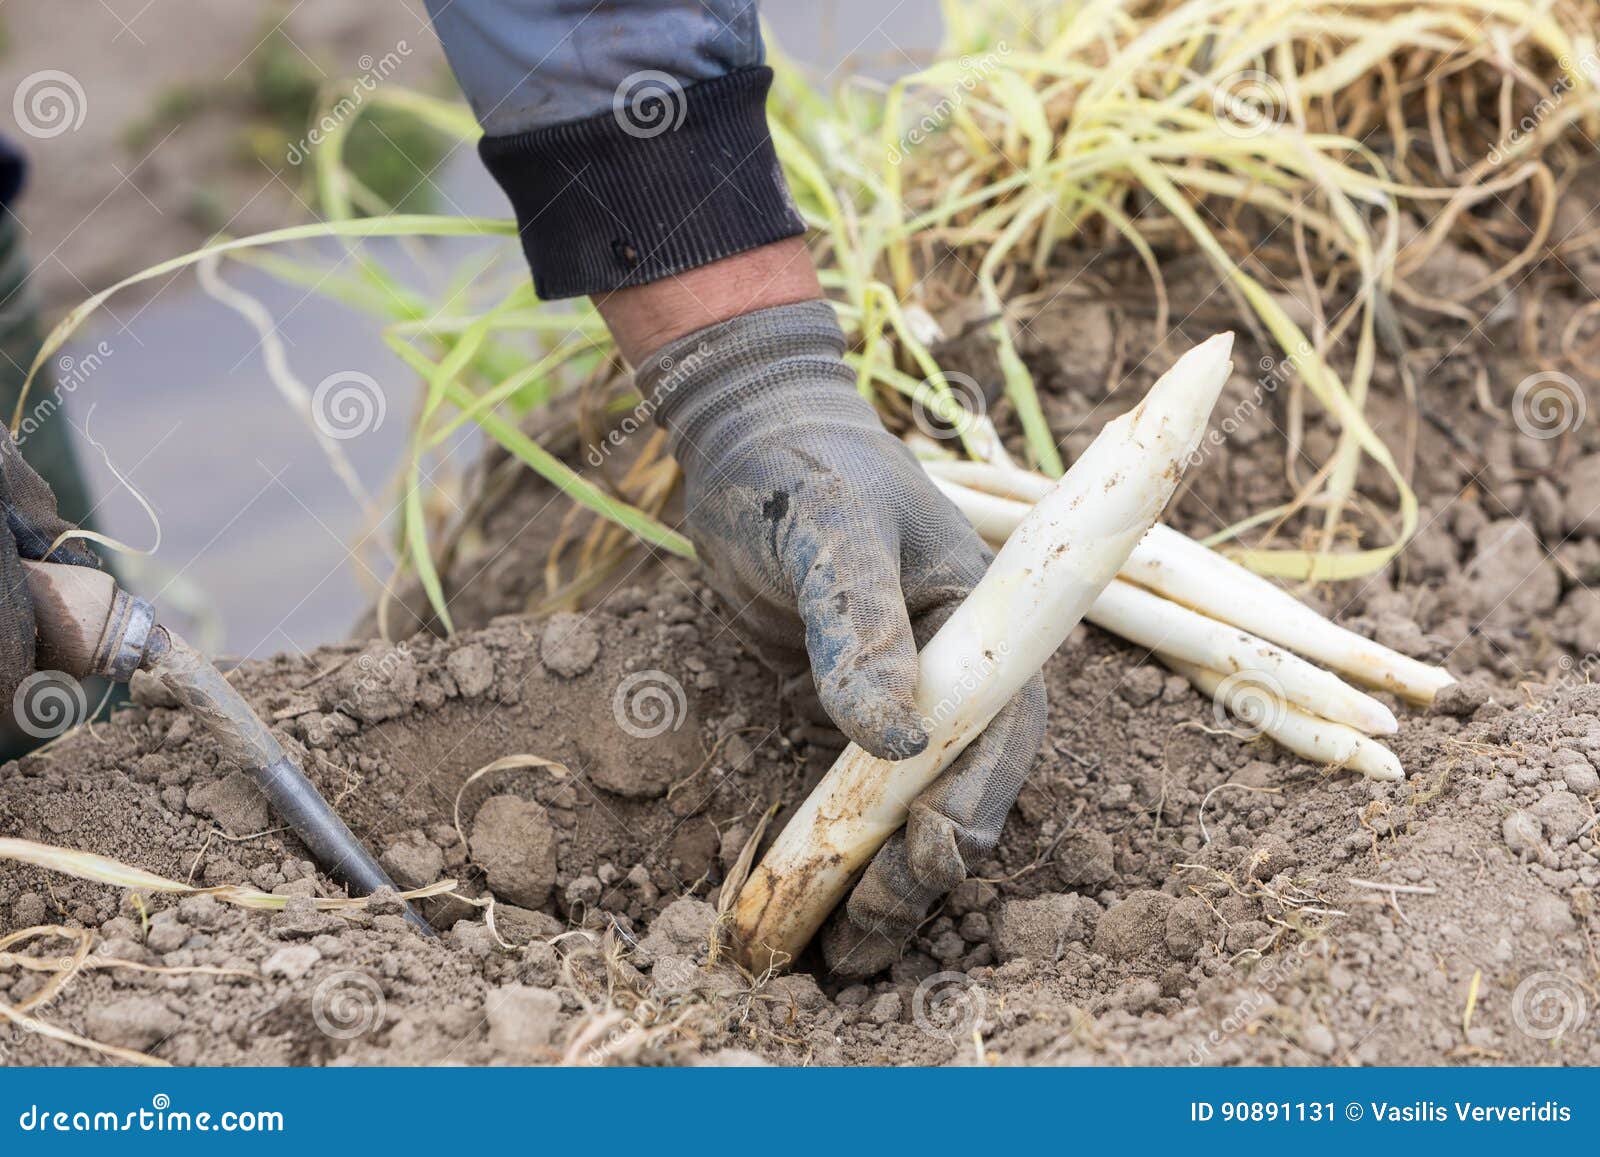 Workers In The Farm During Harvesting White Asparagus Stock Image Image Of Harvest Employee 90891131,Transplanting Yucca